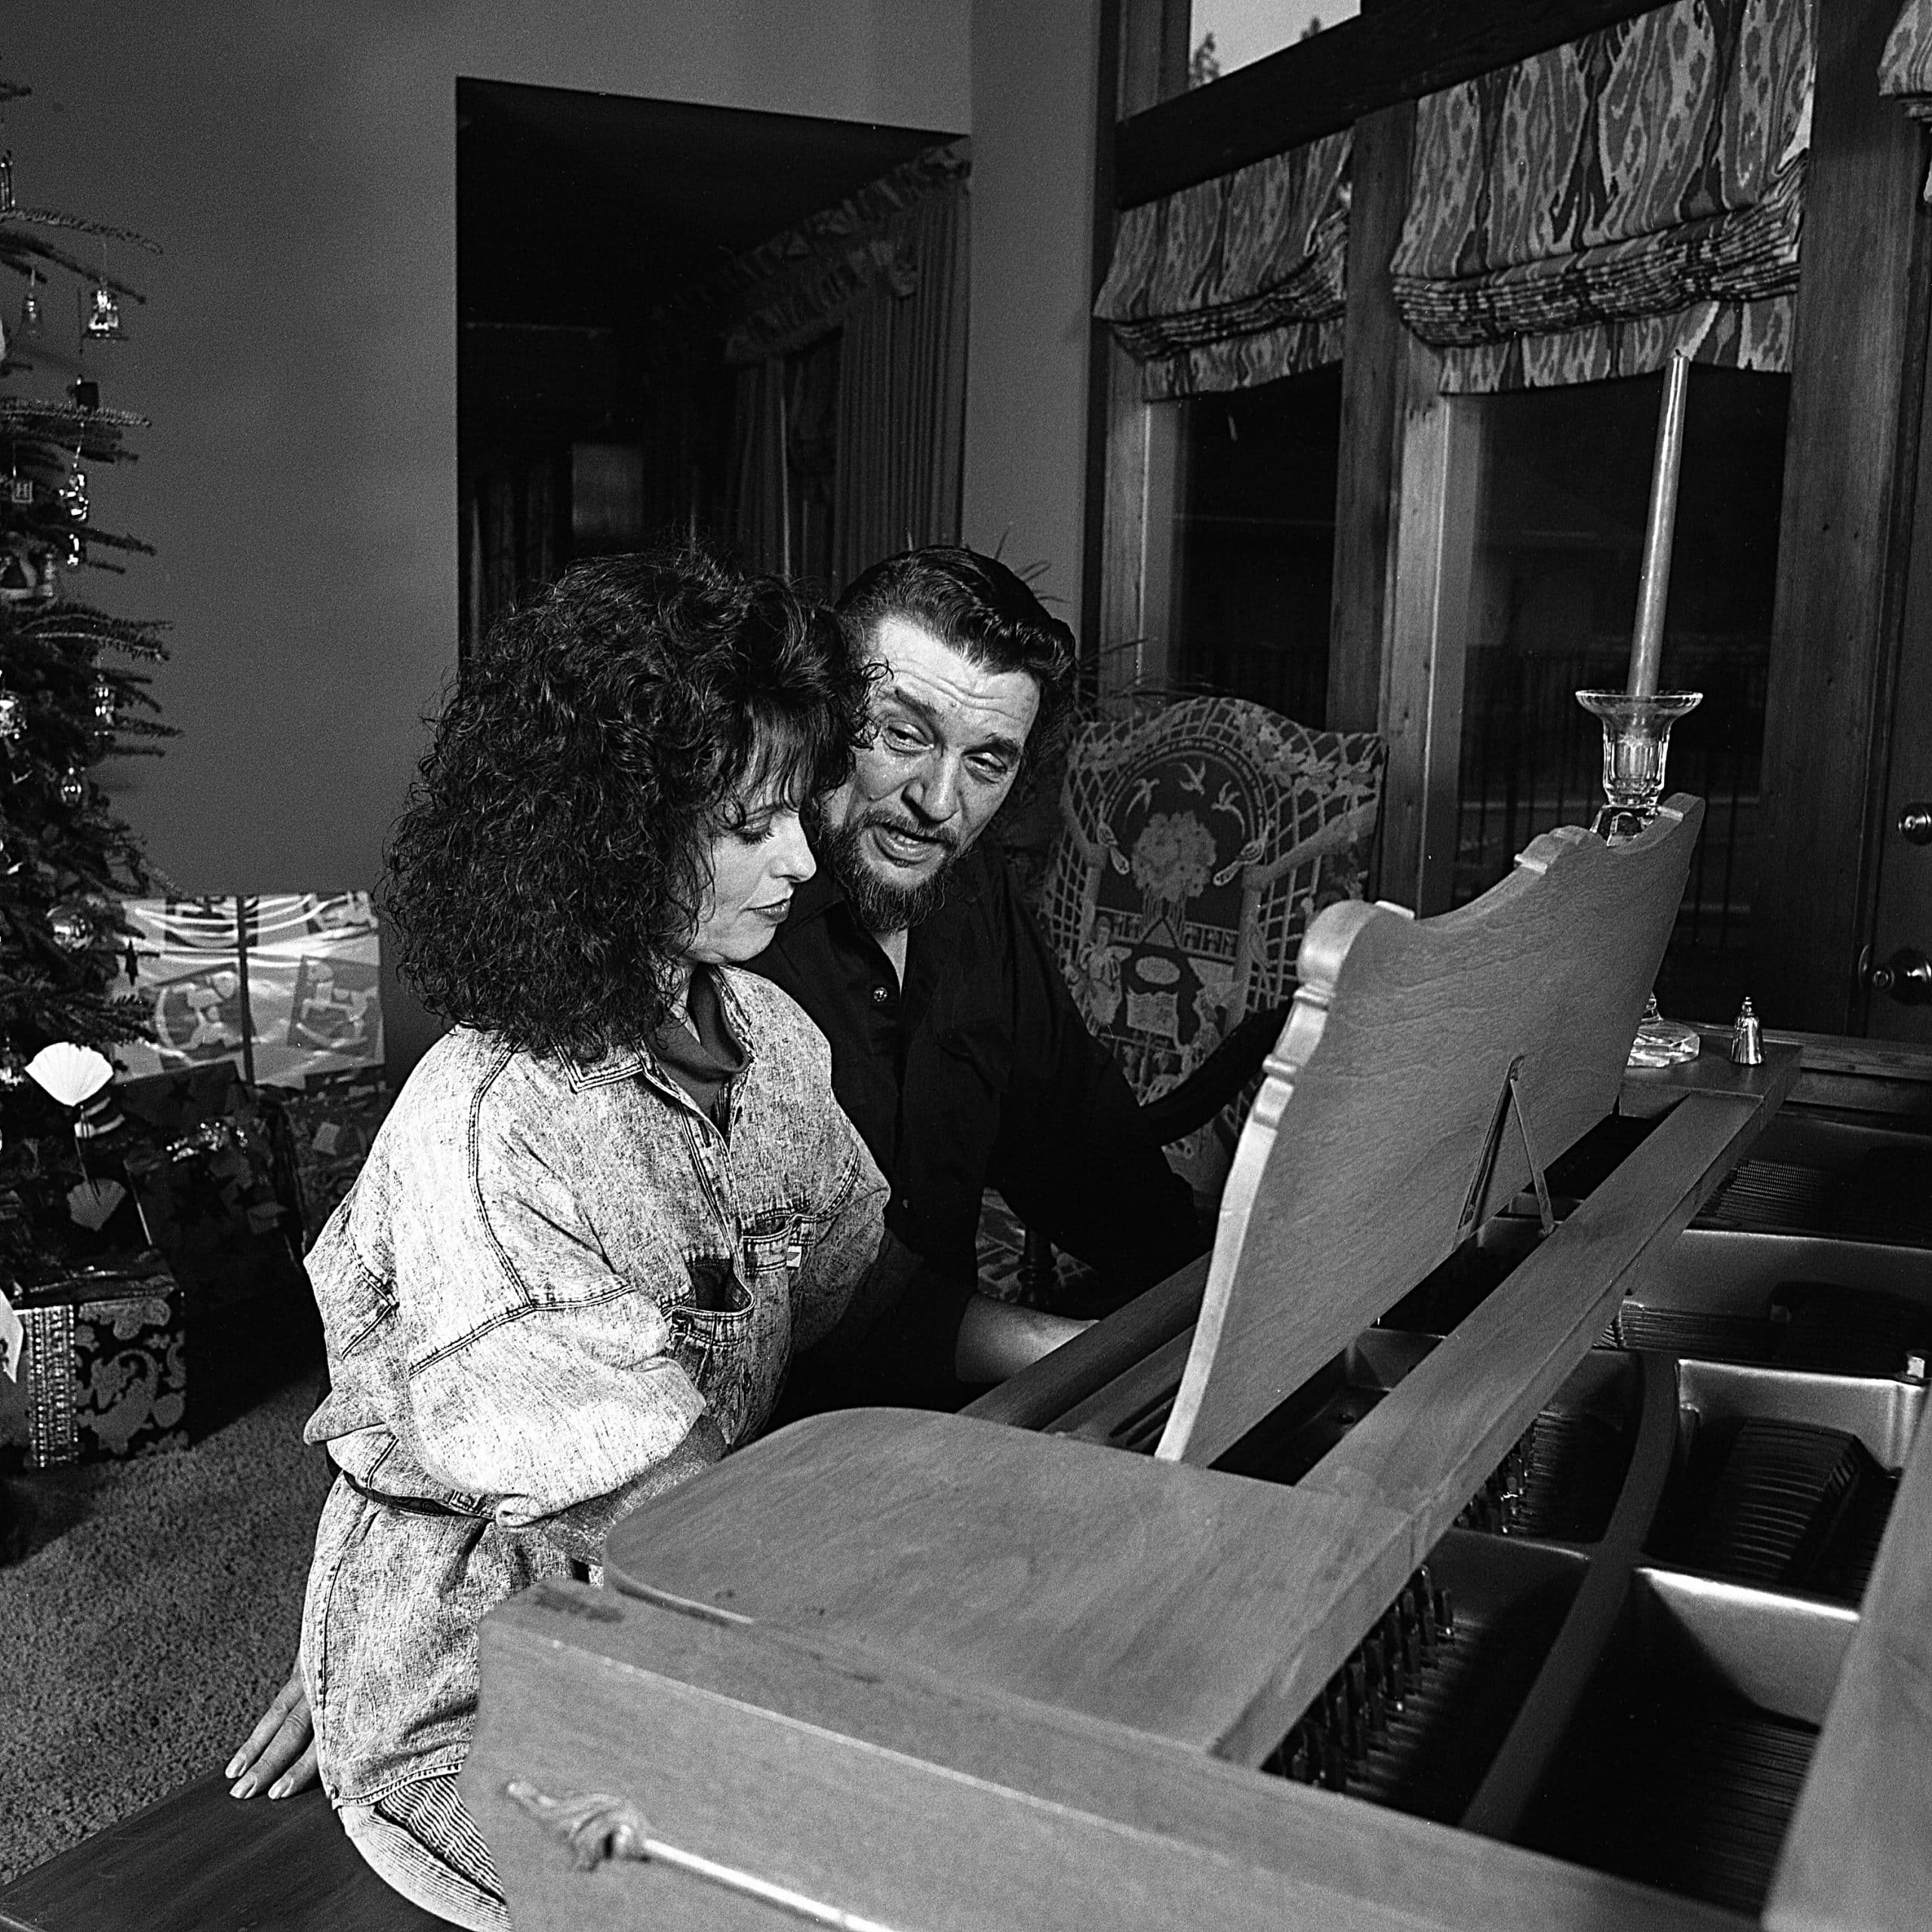 NASHVILLE - DECEMBER 9: Husband and wife country singers and songwriters Waylon Jennings and Jessi Colter in their living room on December 9, 1987 in Nashville, Tennessee. (Photo by Beth Gwinn/Getty Images)